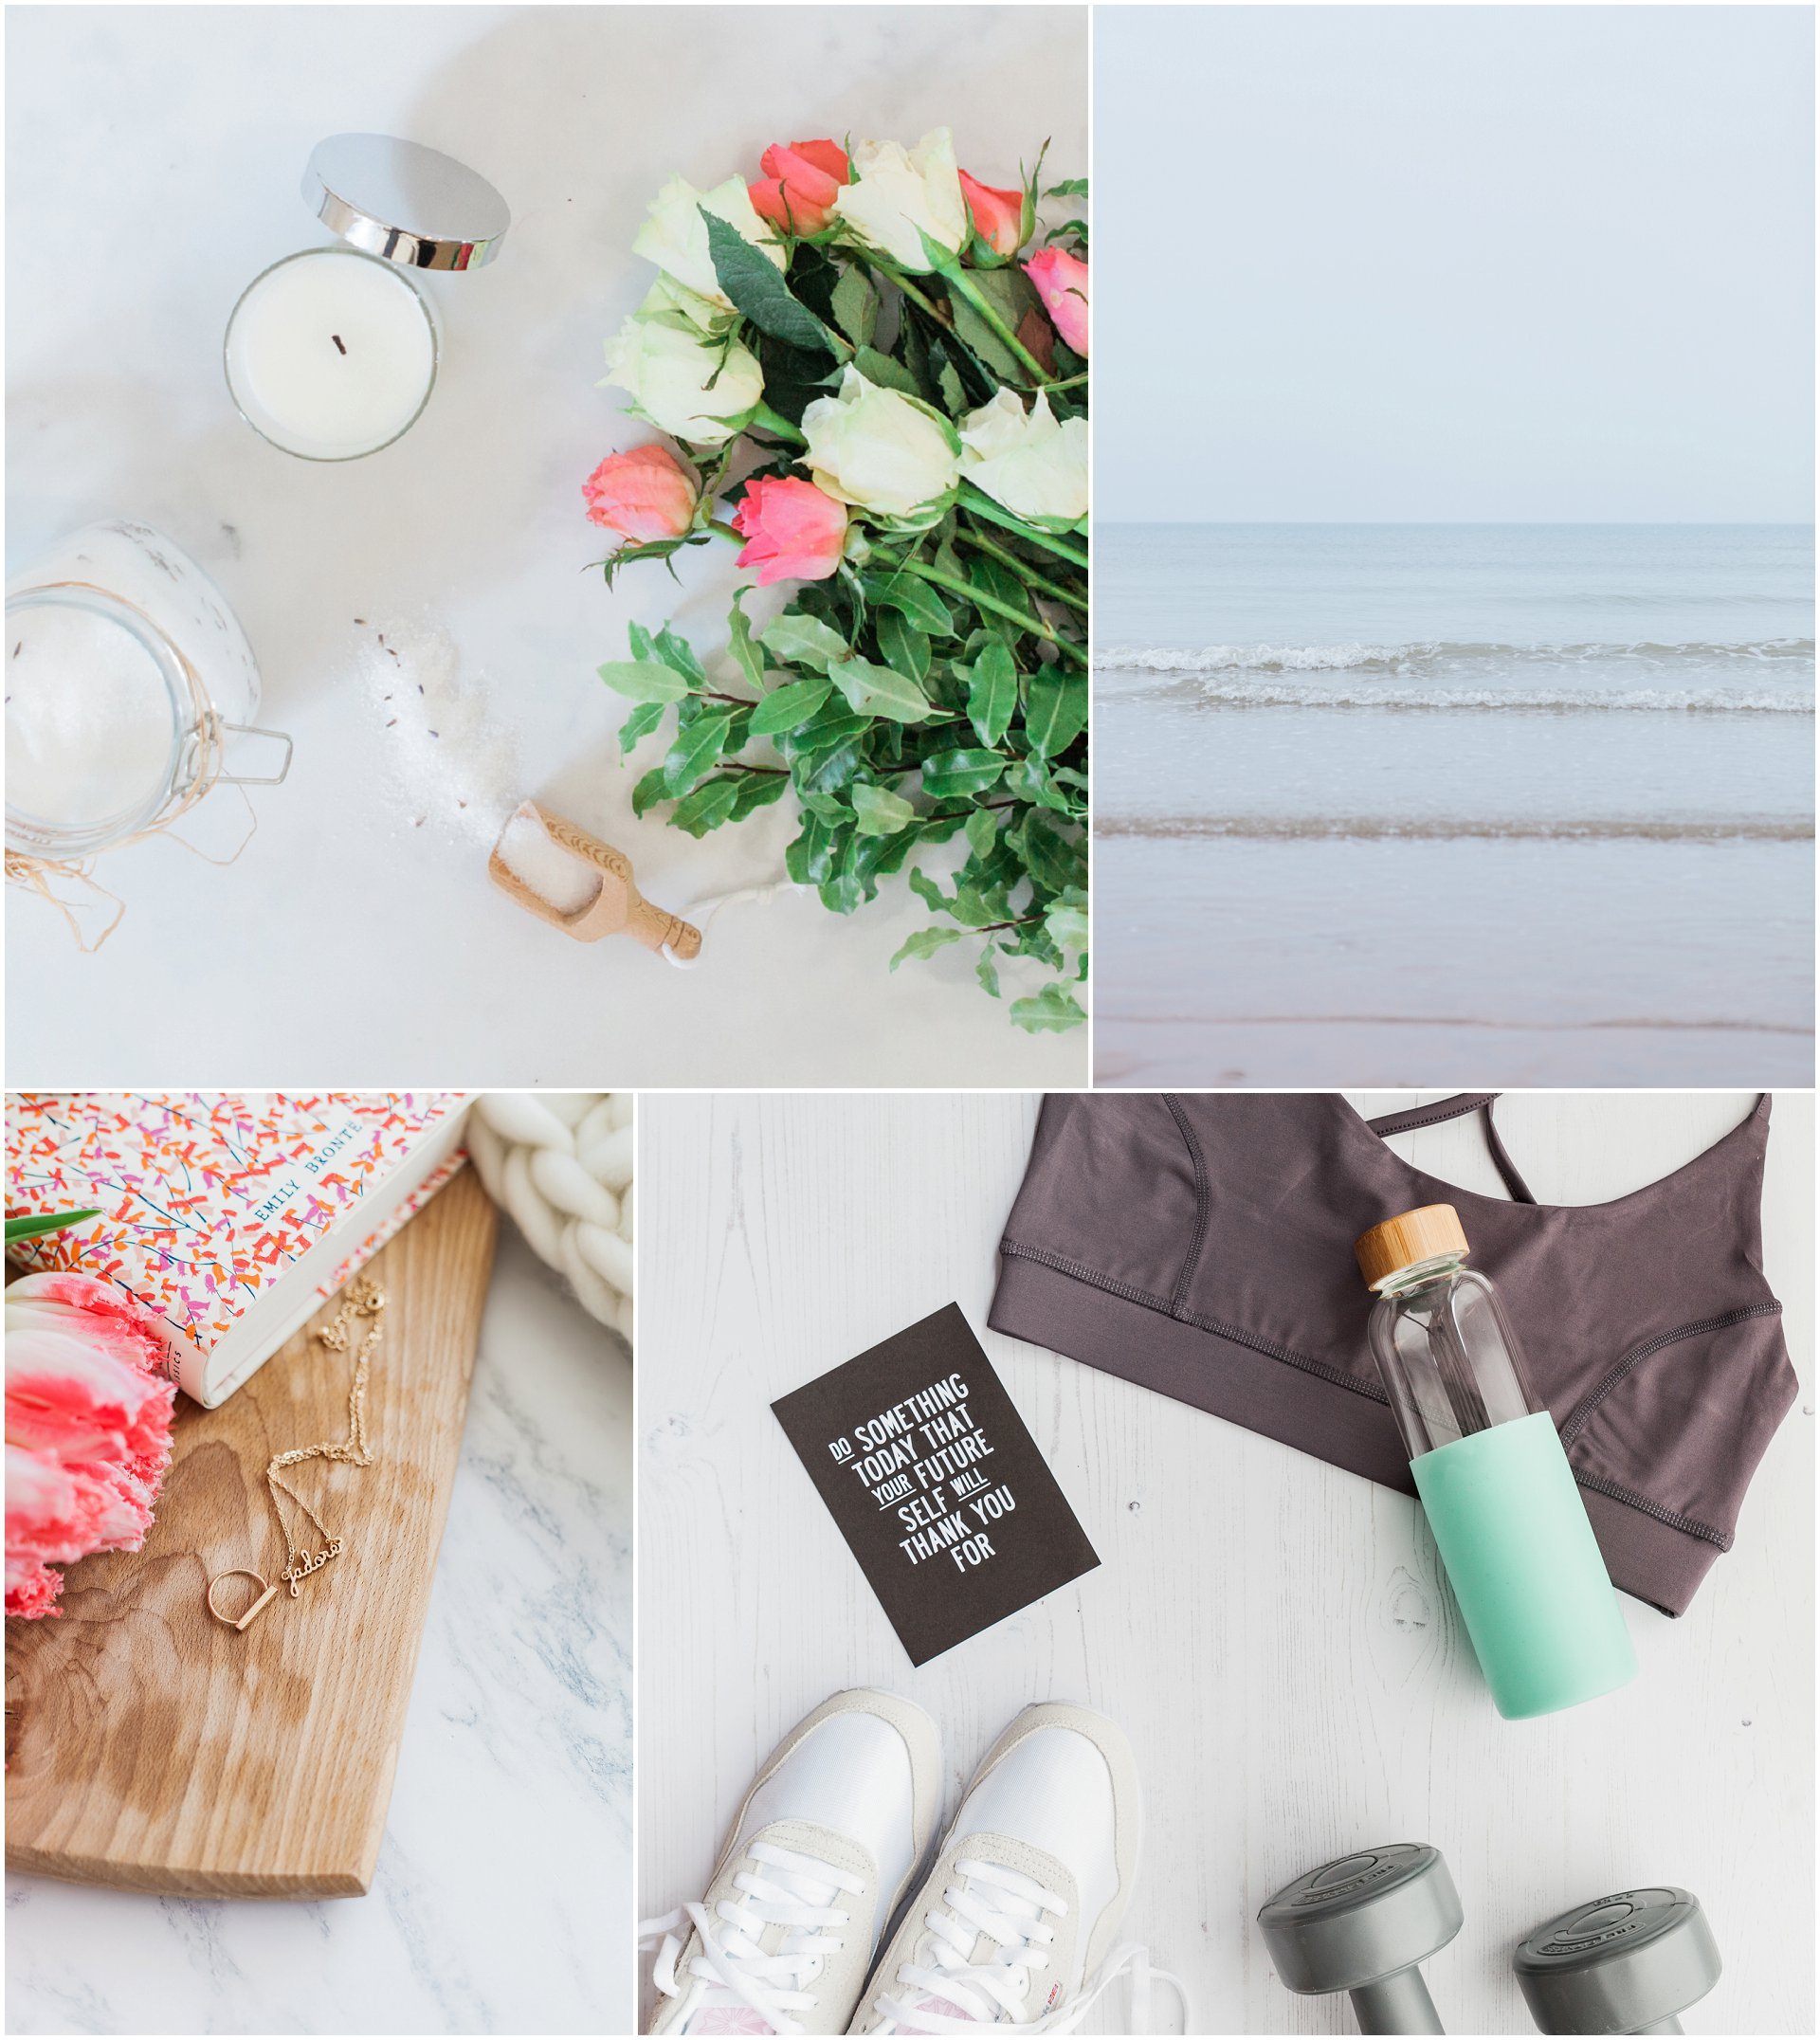 A selection of wellbeing stock images by London stock photographer and brand photographer AKP Branding Stories - stock photography trends